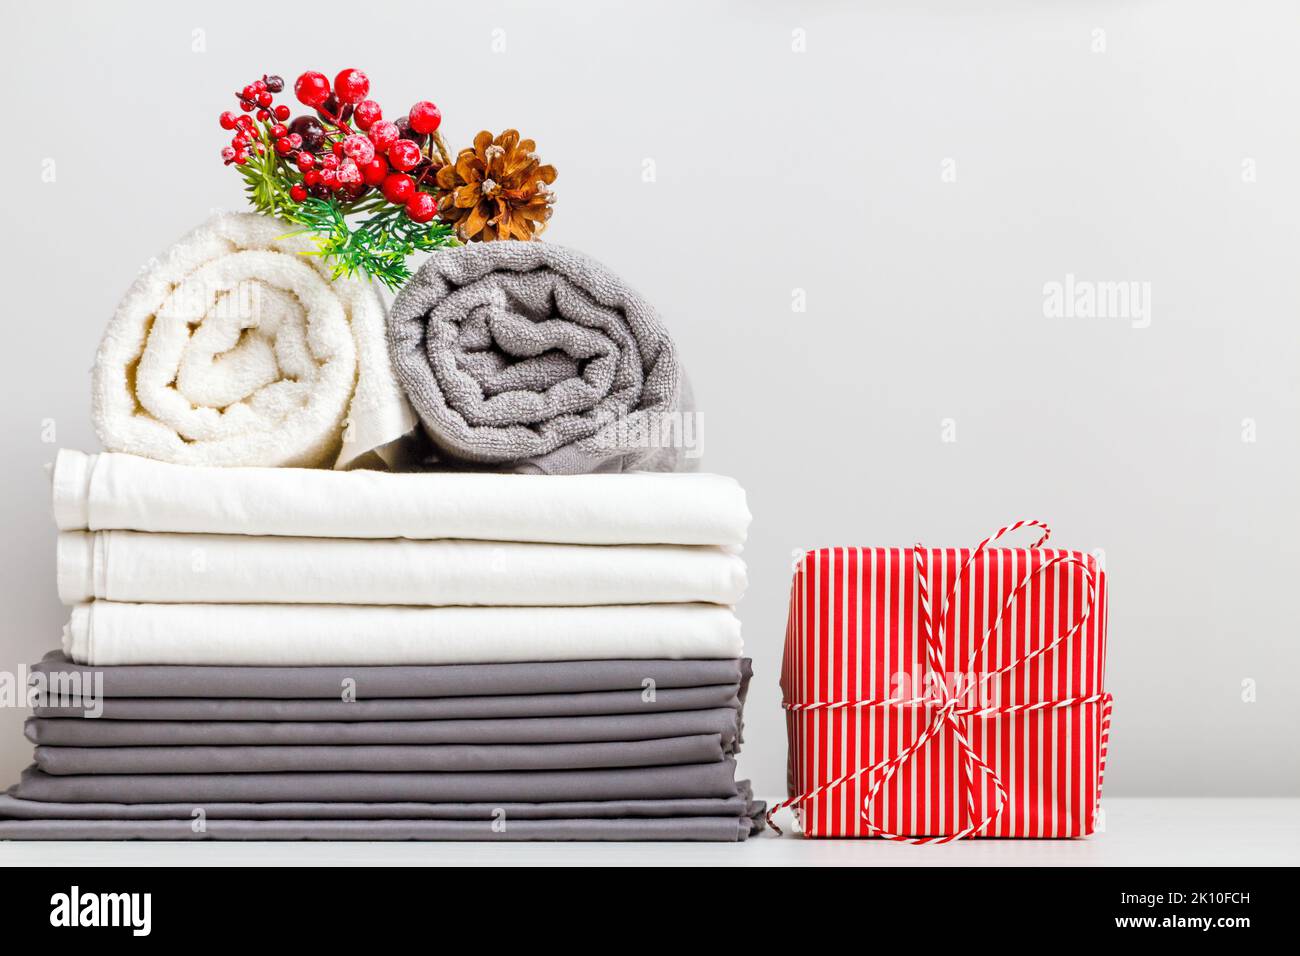 Folded rolls of towels and bed linen, sheets on the table with Christmas decor and a gift. Stock Photo